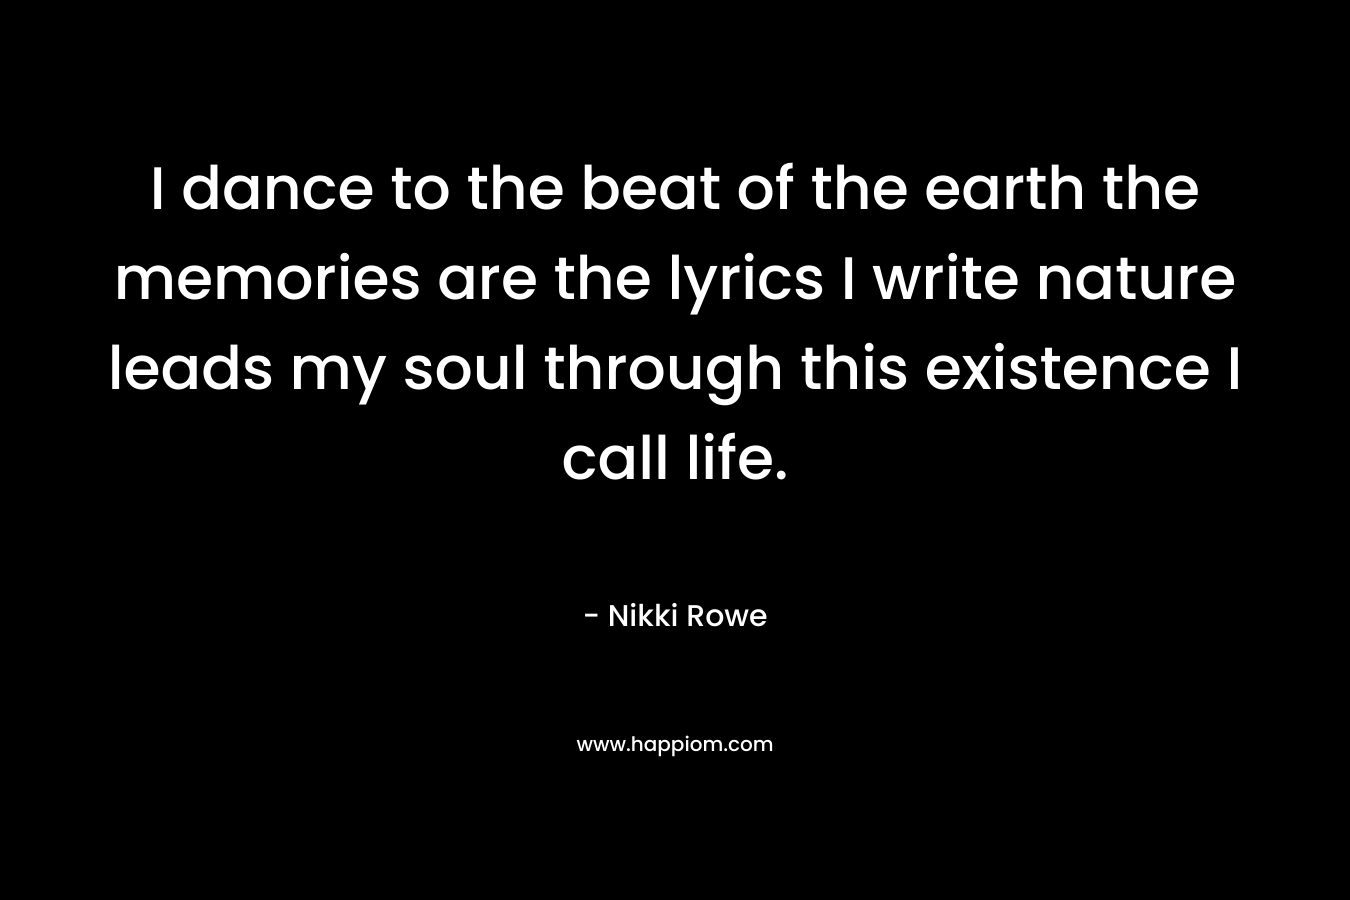 I dance to the beat of the earth the memories are the lyrics I write nature leads my soul through this existence I call life. – Nikki Rowe